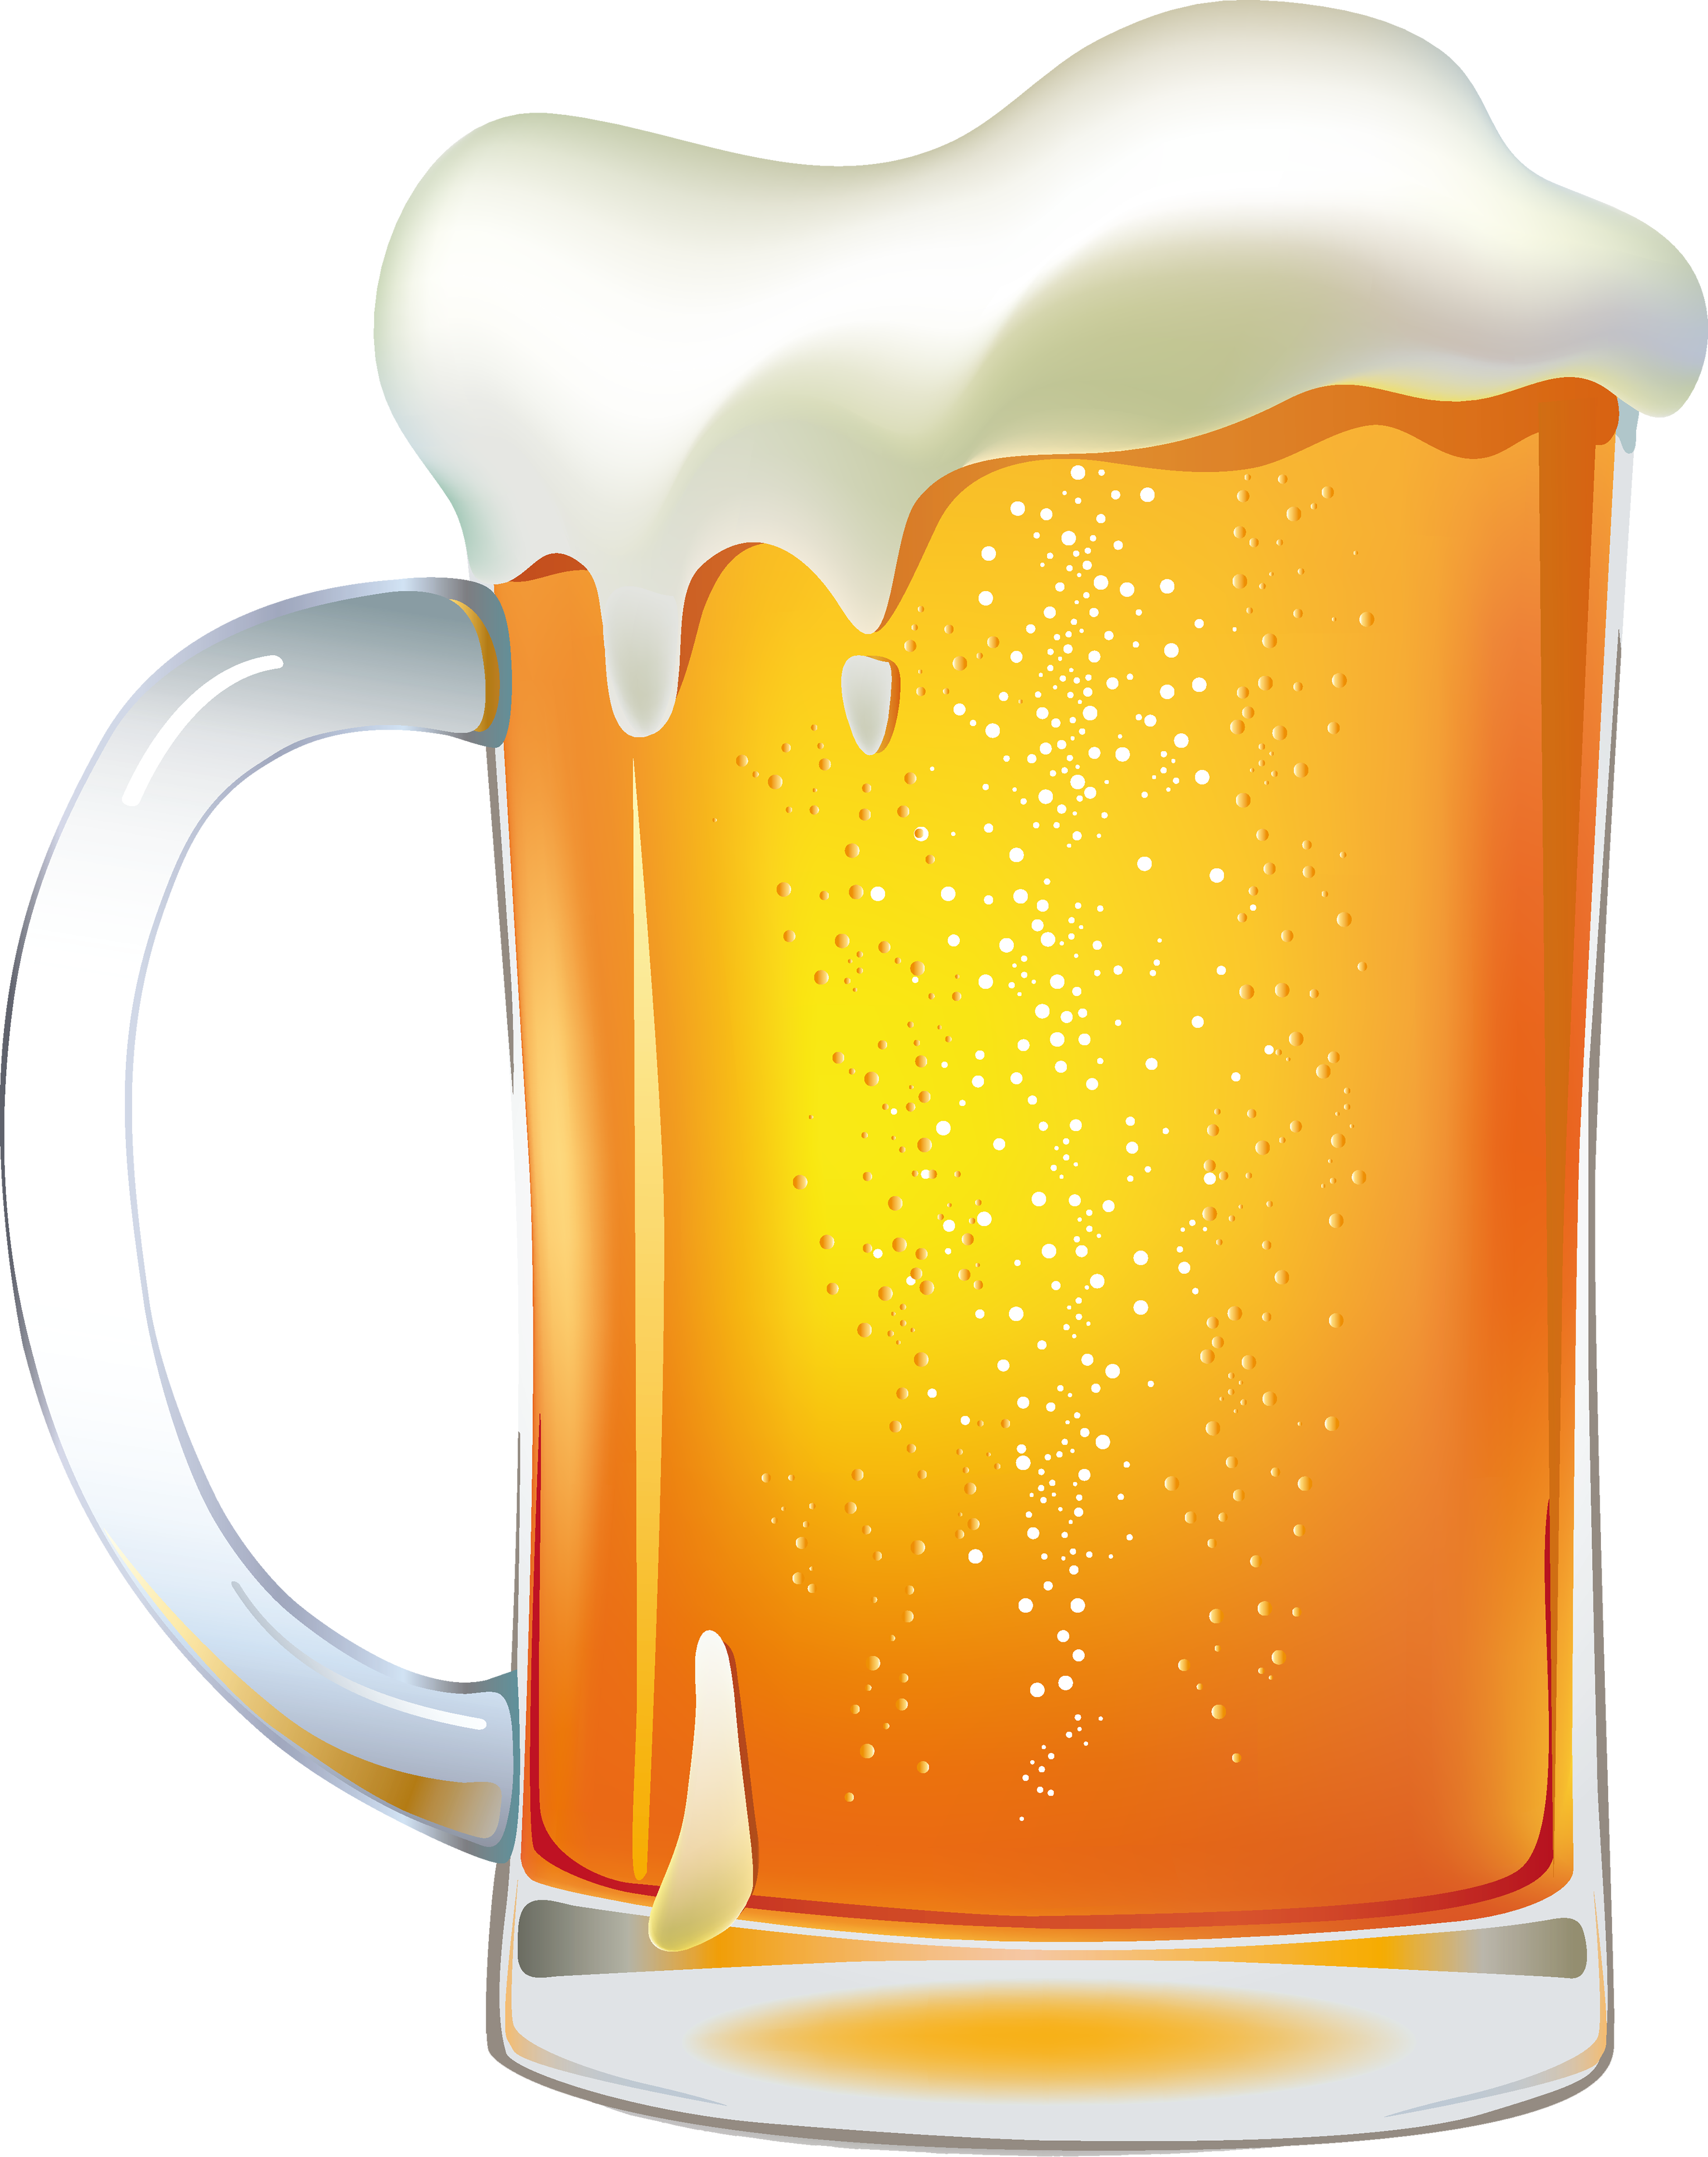 free beer clipart images - photo #26